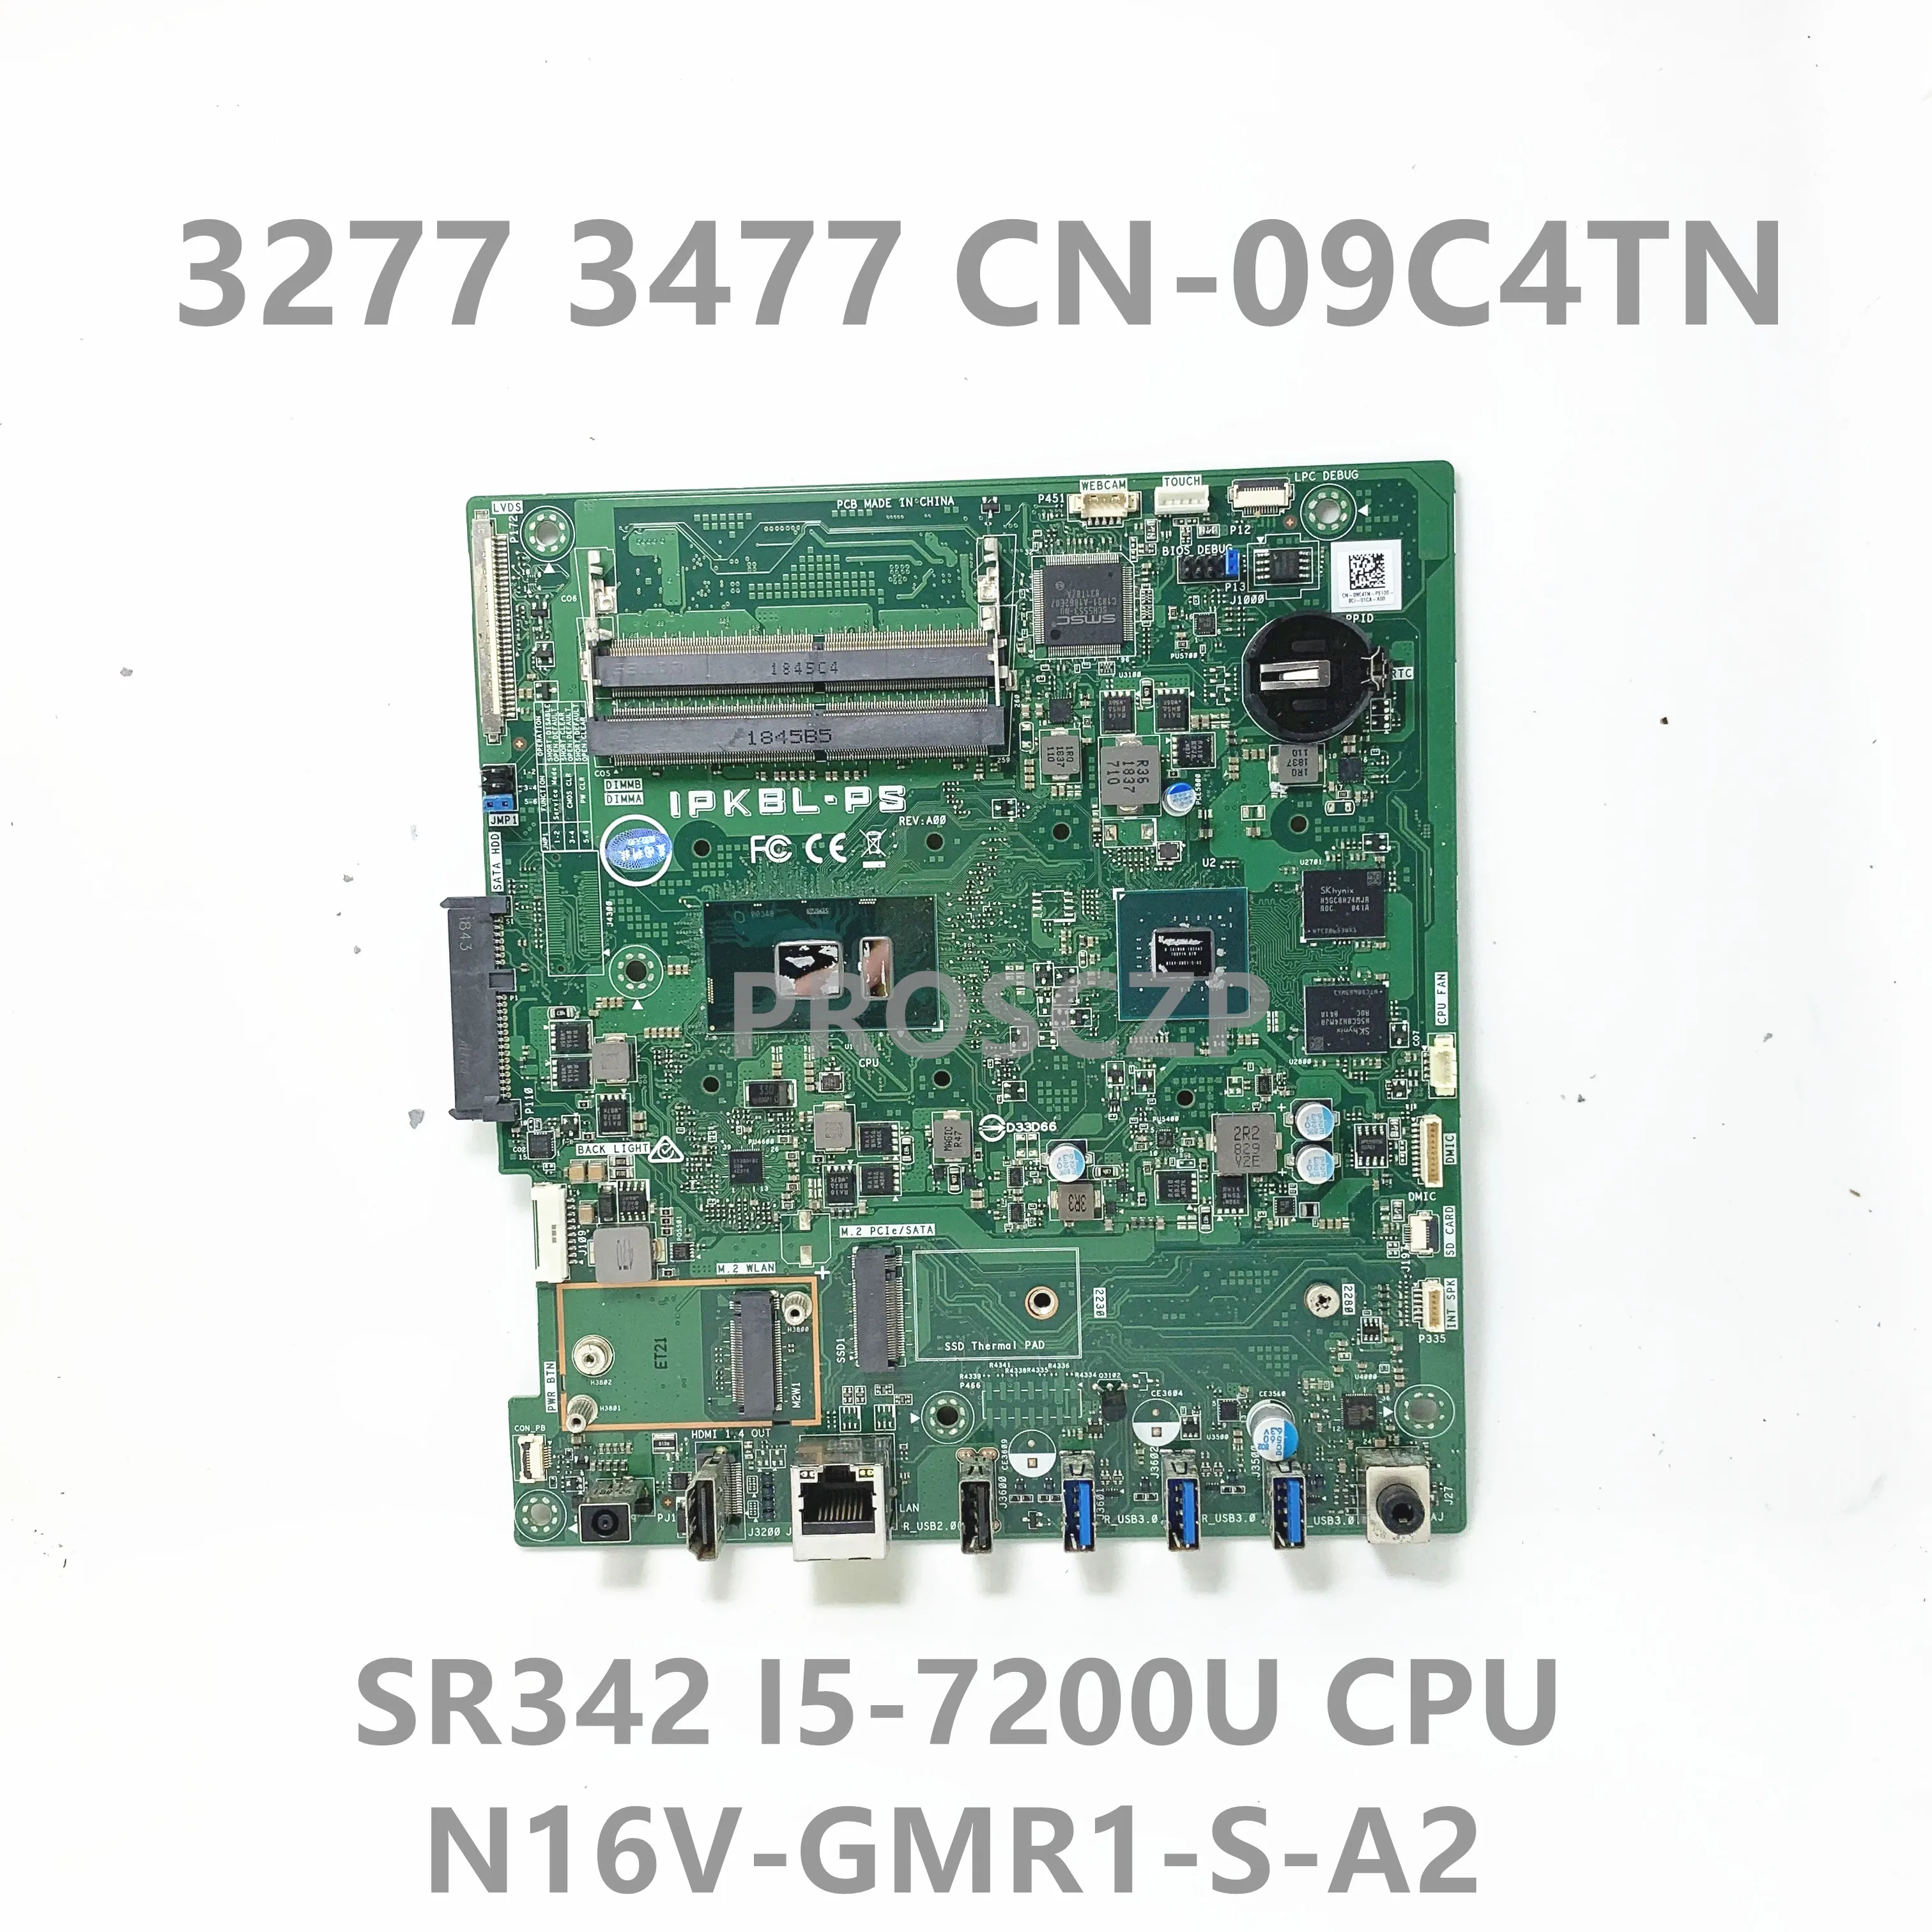 

CN-09C4TN 09C4TN 9C4TN Mainboard For DELL 3277 3477 Laptop Motherboard N16V-GMR1-S-A2 With SR342 i5-7200U CPU 100% Working Well